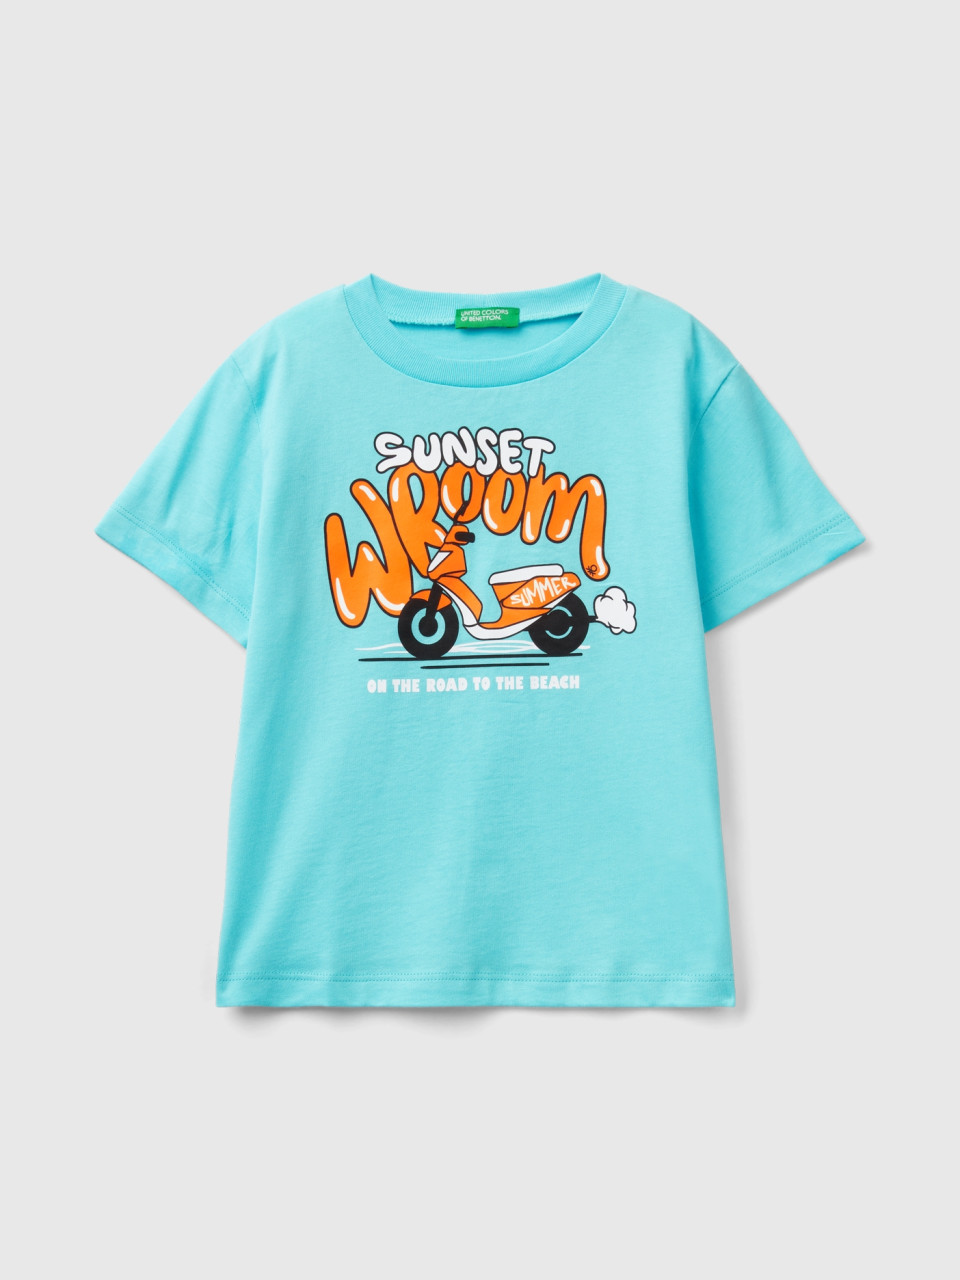 Benetton, T-shirt With Print And Neon Details, Turquoise, Kids